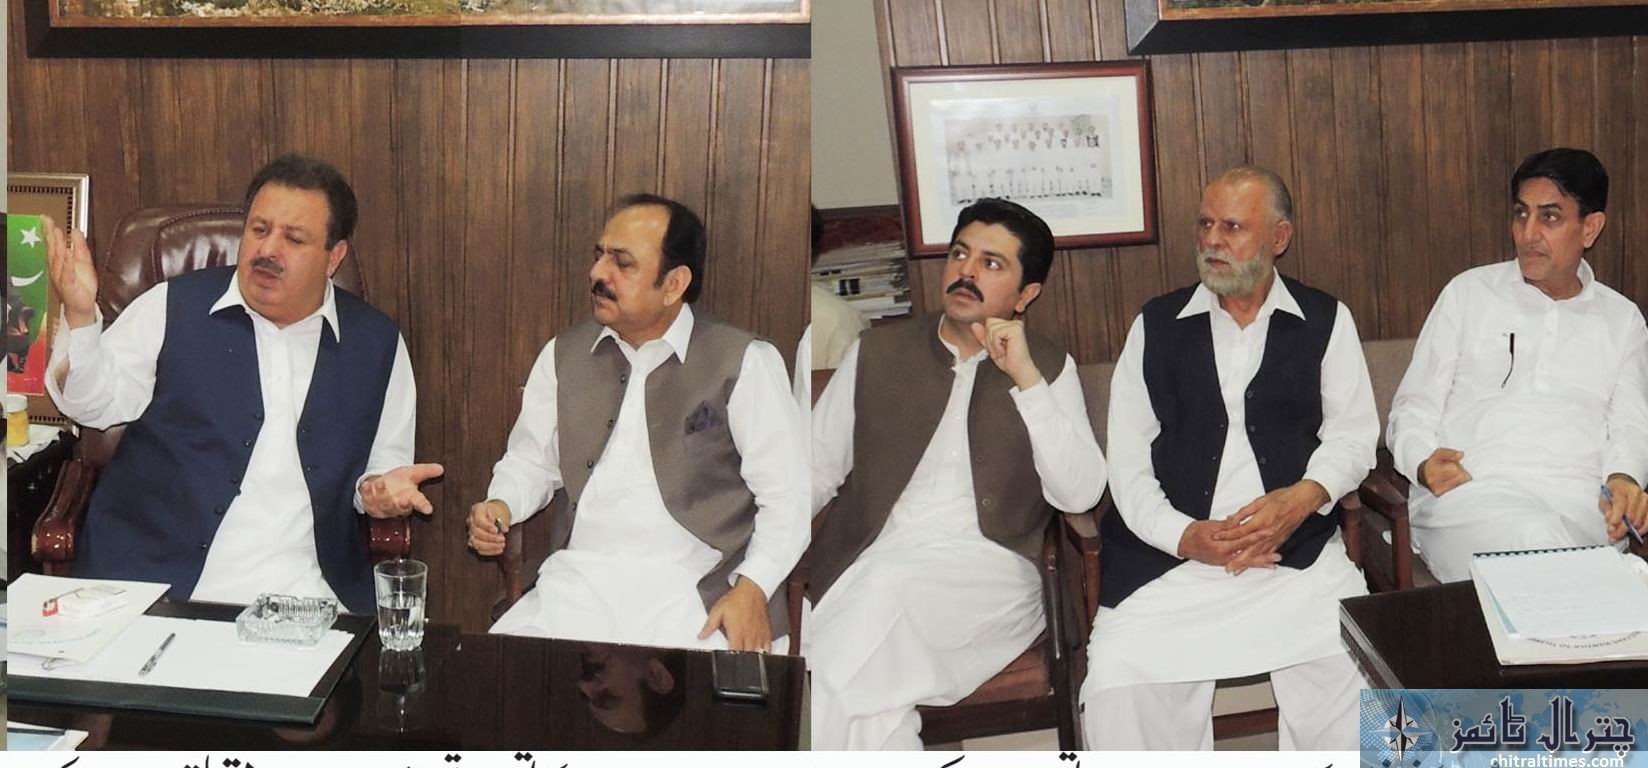 minister cw akber ayub khan presiding over a cw meeting at abbottabad